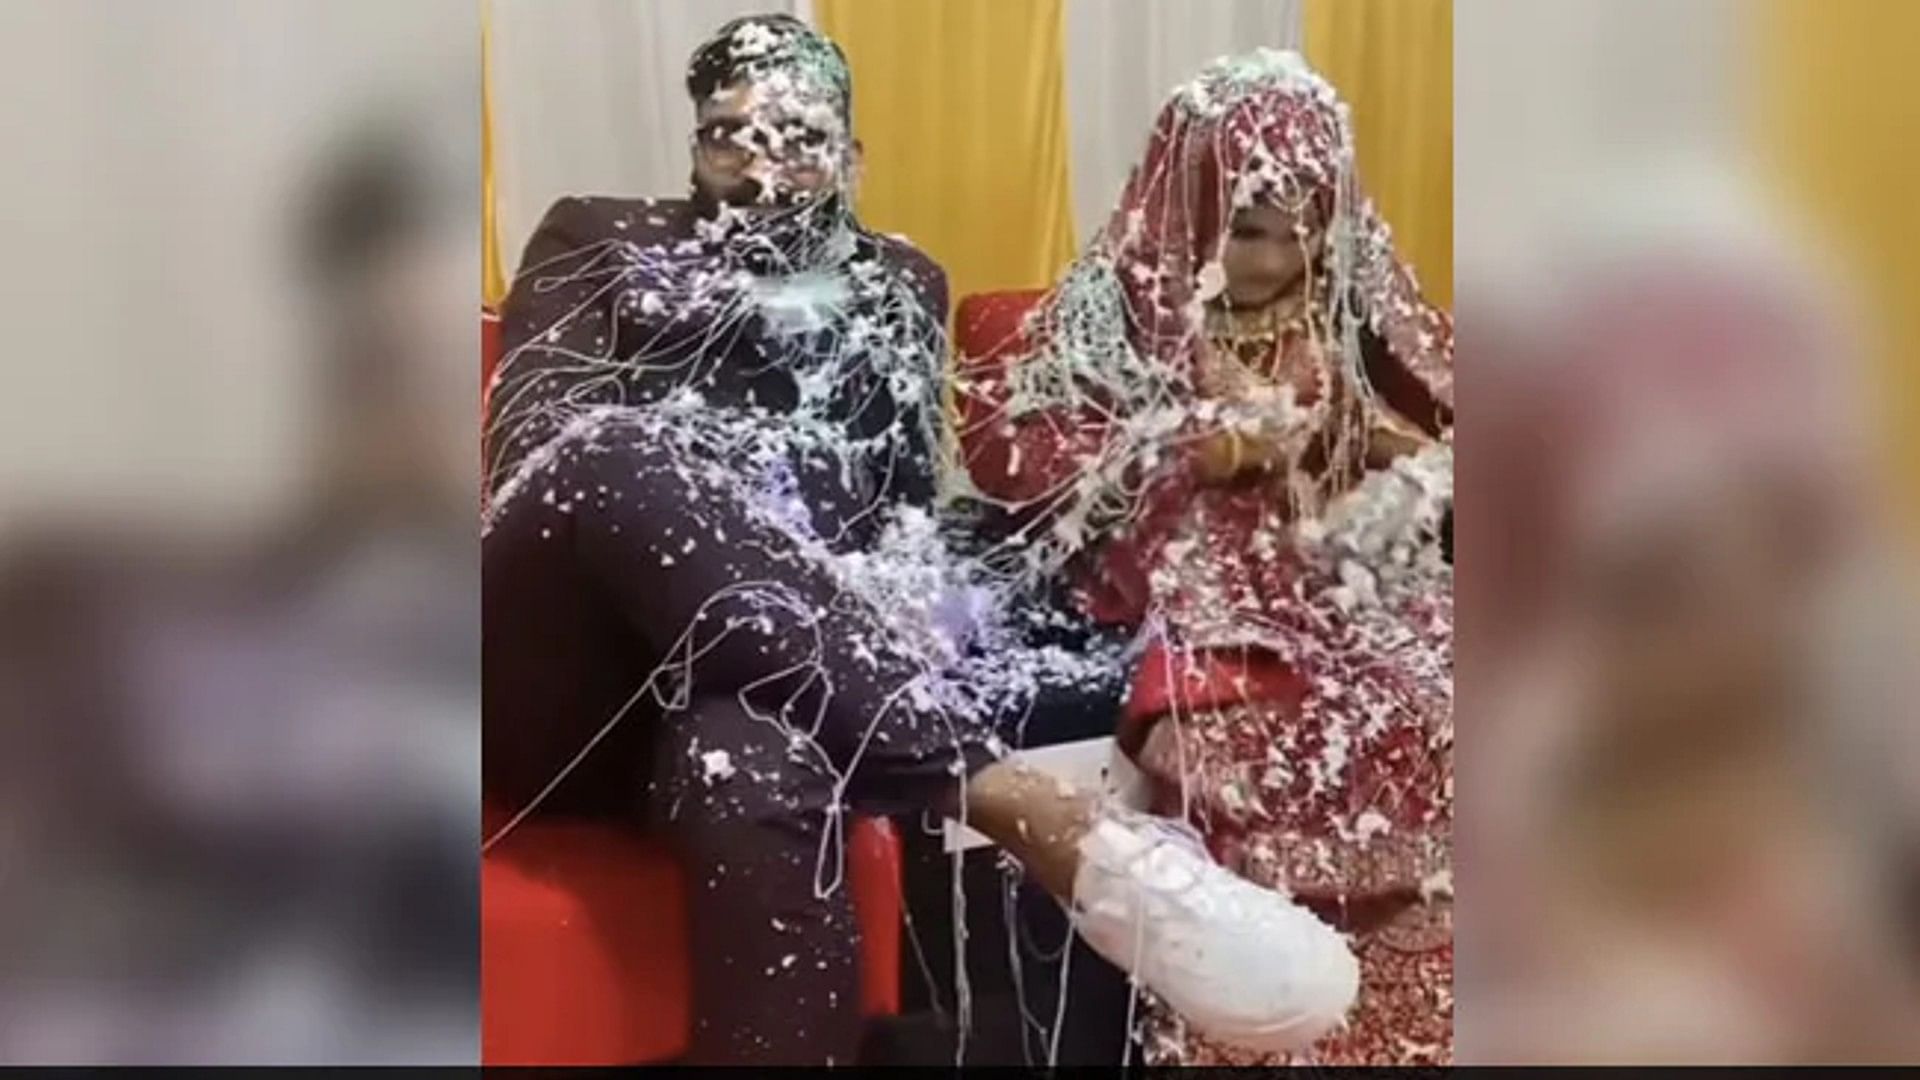 groom friends did dirty act with bride and groom on stage the bride got angry